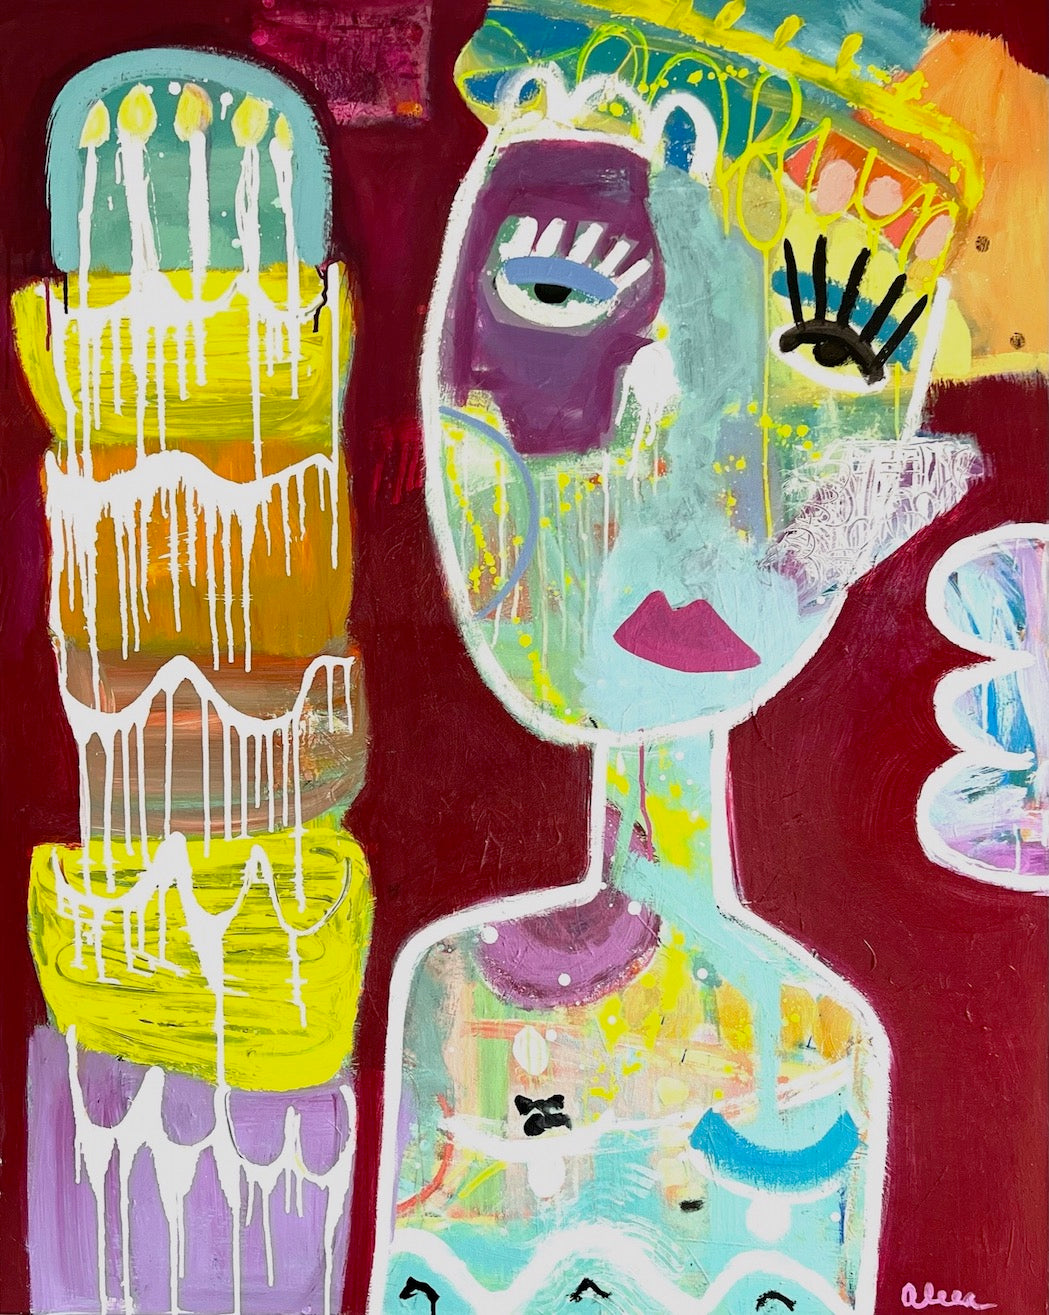 ALEEA JACQUES - I'll Have My Cake and Eat It Too | Painting, buy at DOORS NYC